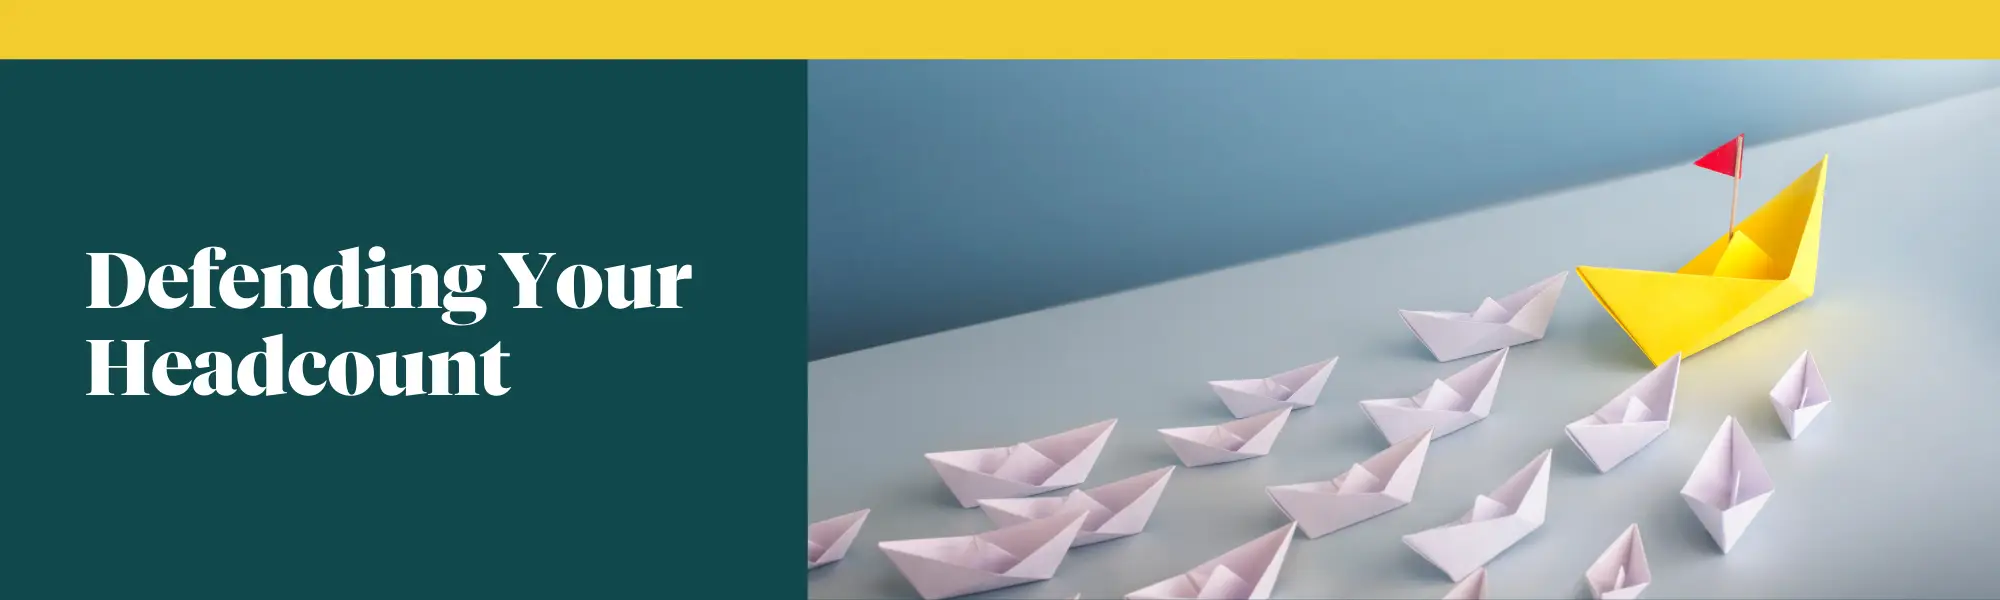 A yellow paper boat followed by a larger number of white paper boats